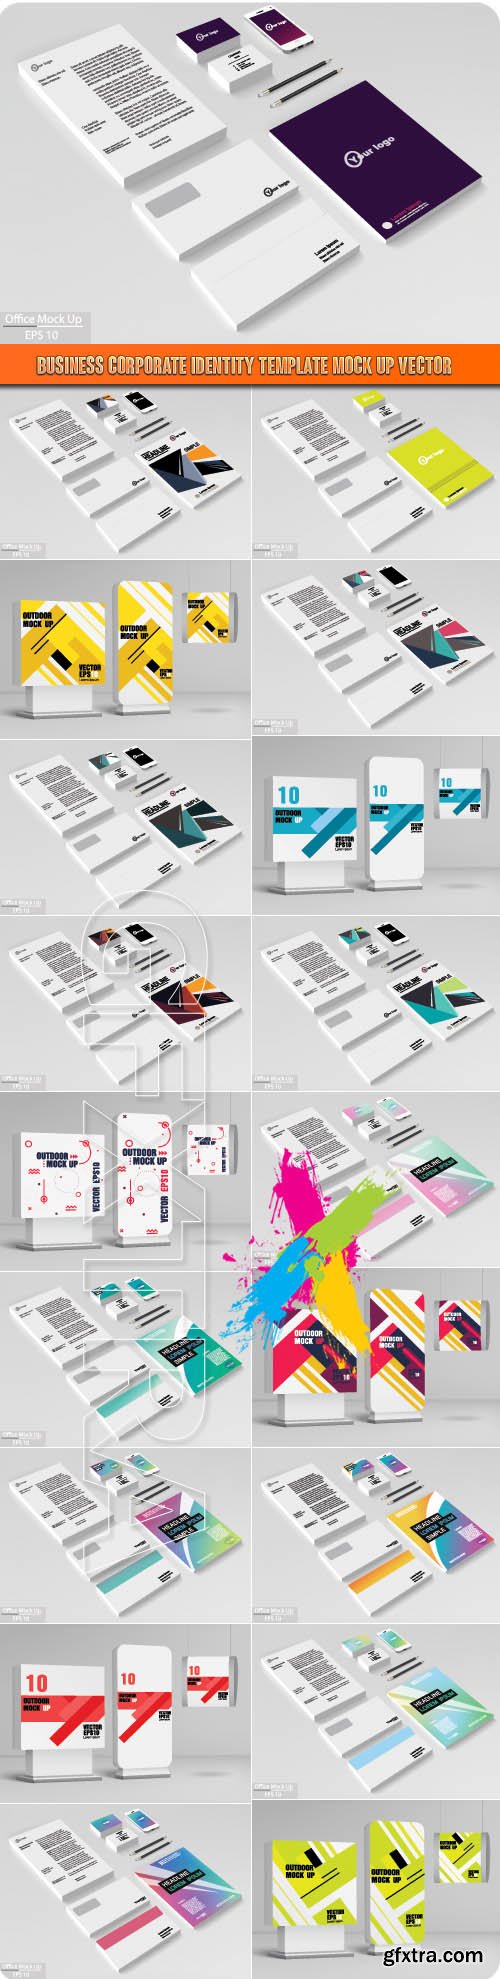 Business corporate identity template mock up vector